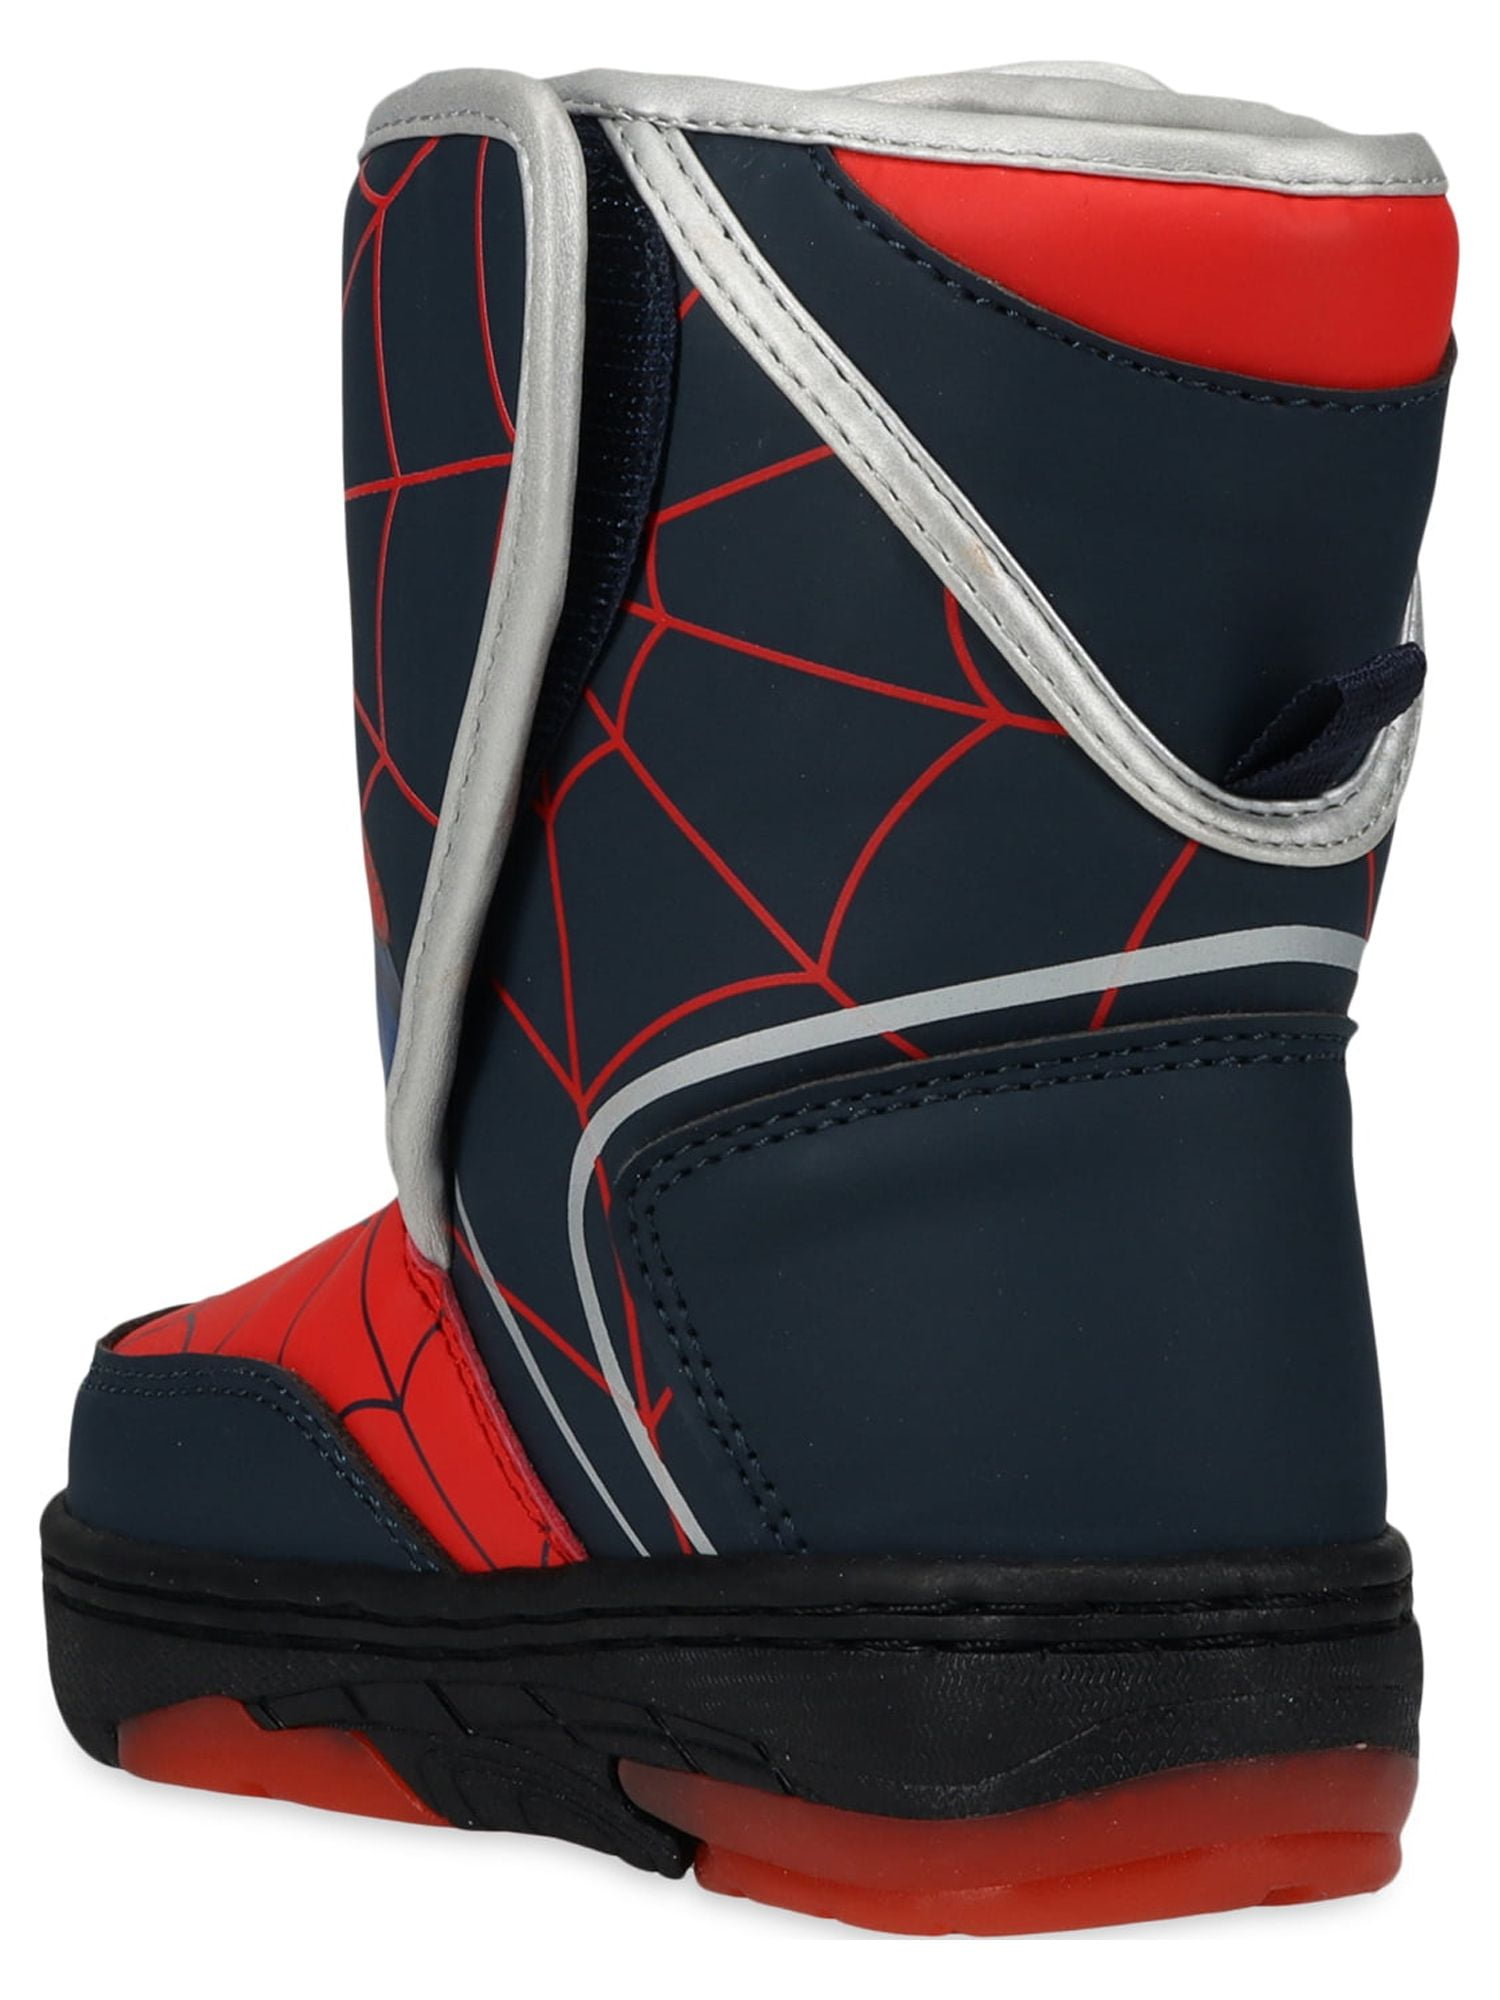 7-12 Spiderman Boots, Snow Up Toddler Winter Boys Light Sizes